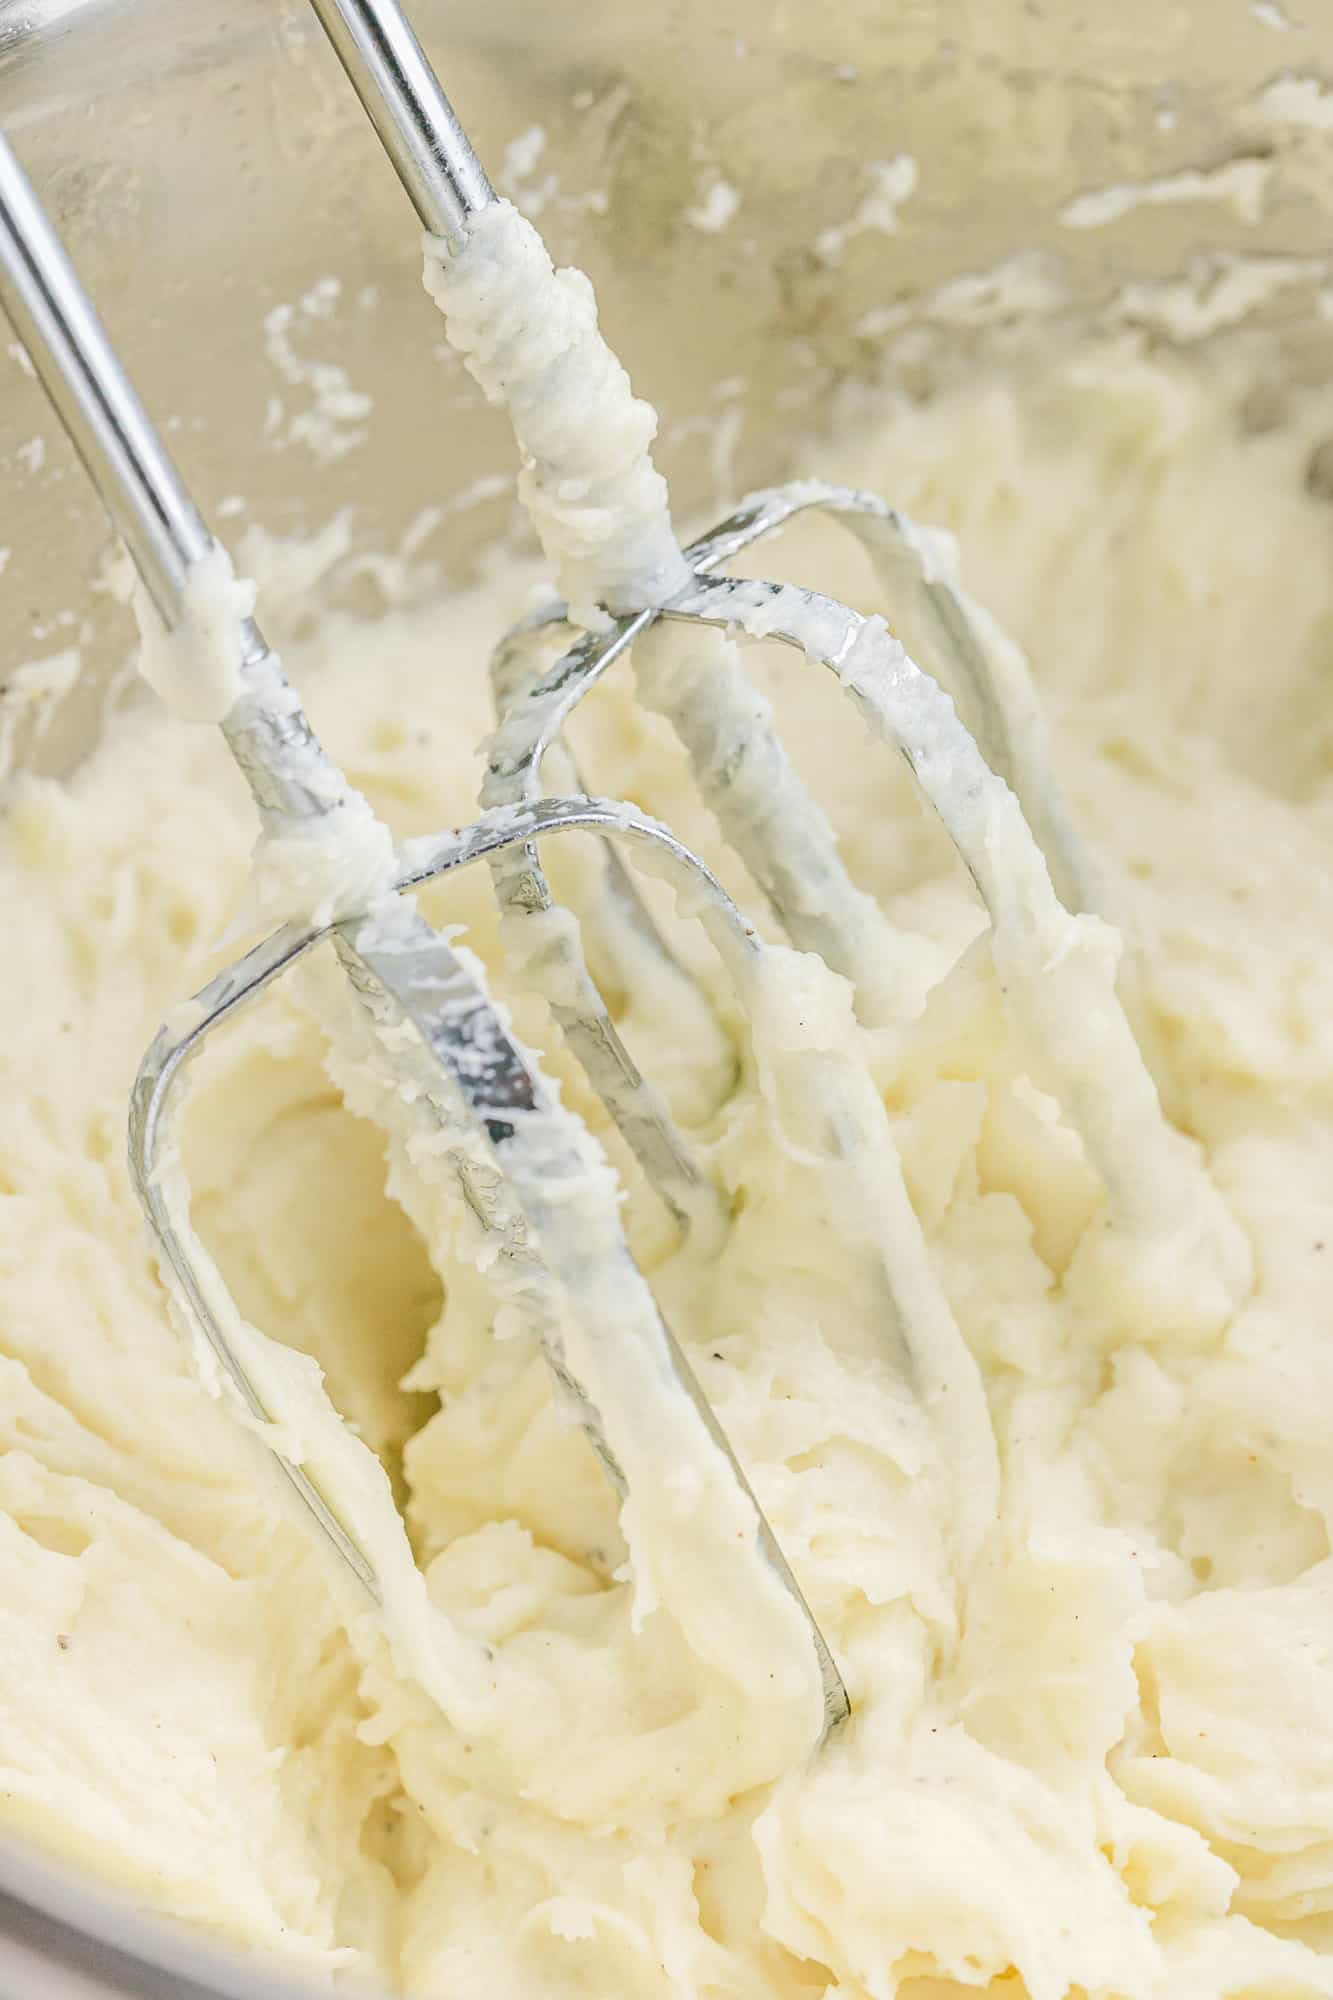 Potatoes mashed with a hand mixer.